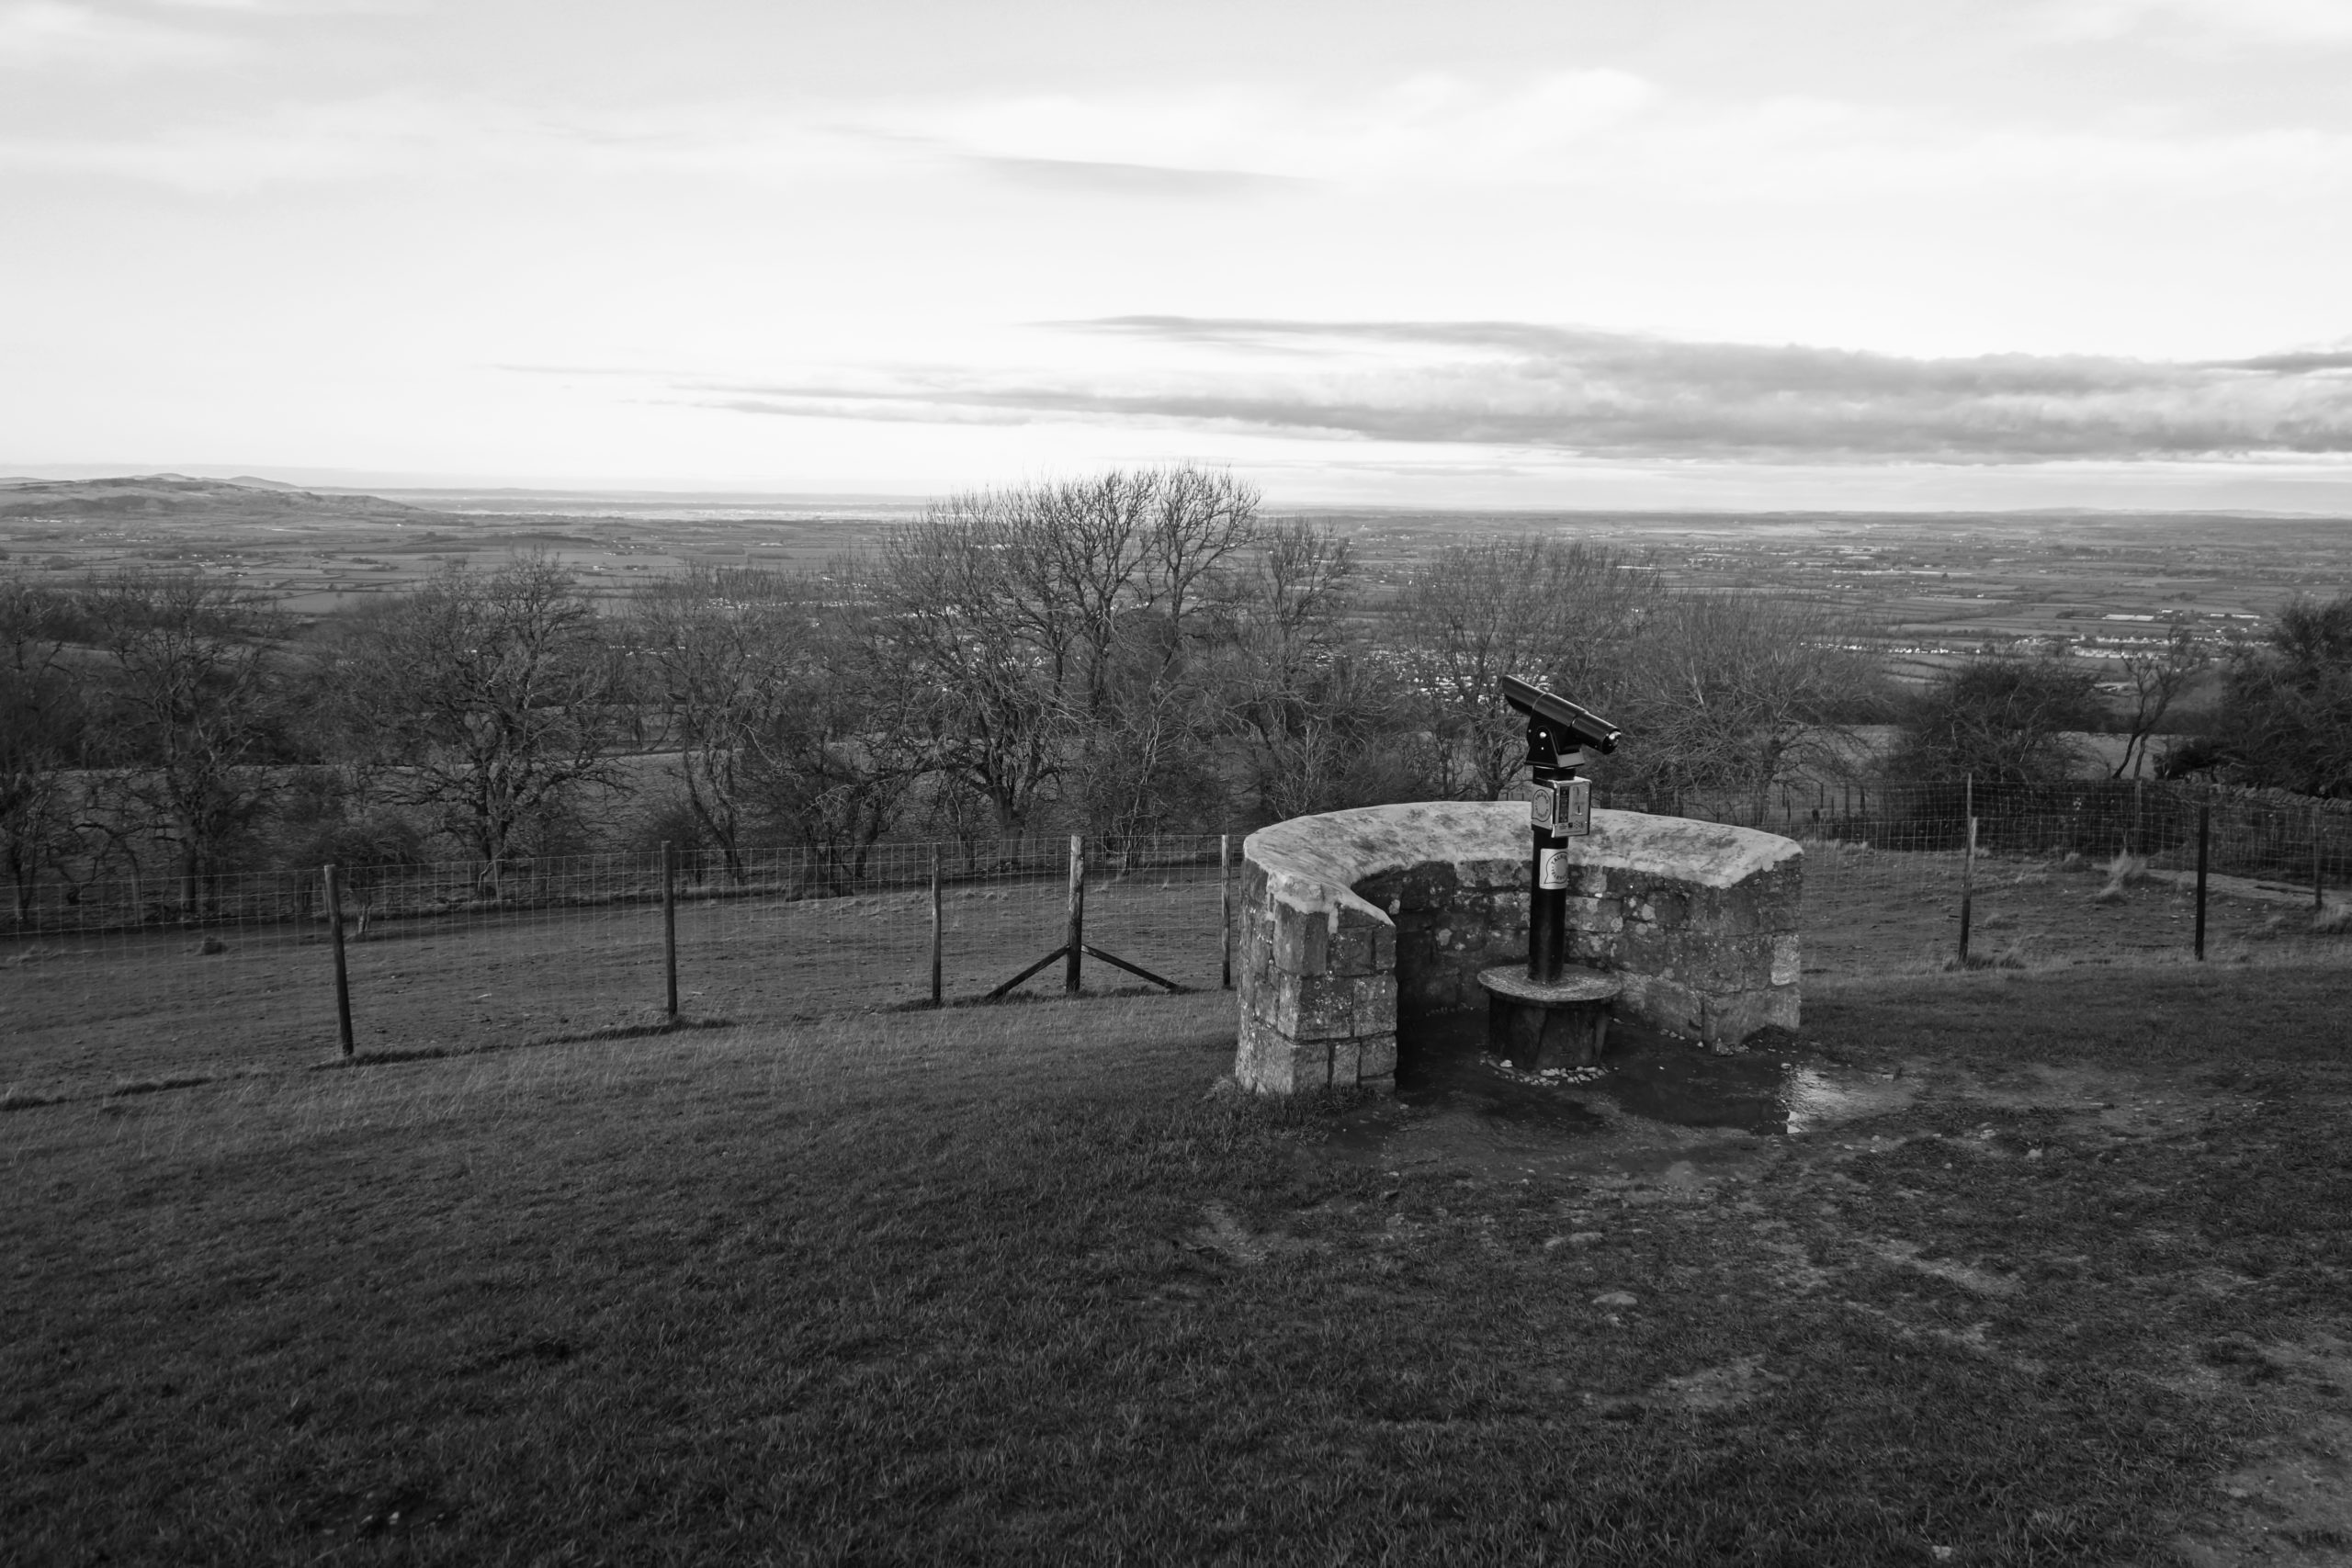 A Lookout Post in Worcestershire England